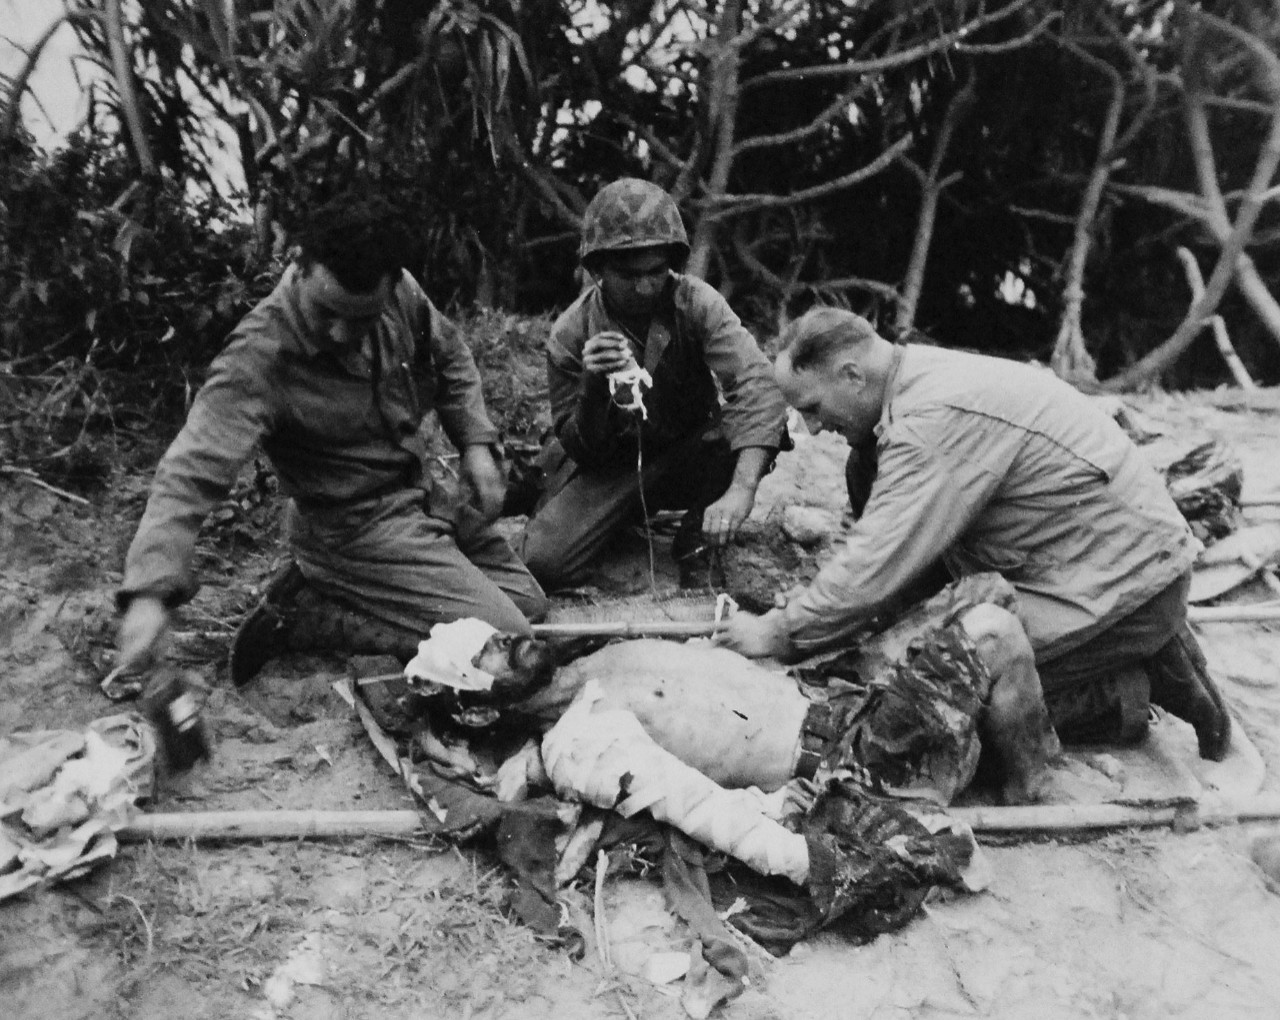 127-GW-666-128476:  Okinawa Campaign, April-June 1945.   Japanese prisoner being given blood plasma and first aid by Marines on Iheya Shima.  Photographed by Rogers, 3-5 June 1945.  Official U.S. Marine Photograph, now in the collection of the National Archives.  (2014/7/23). 